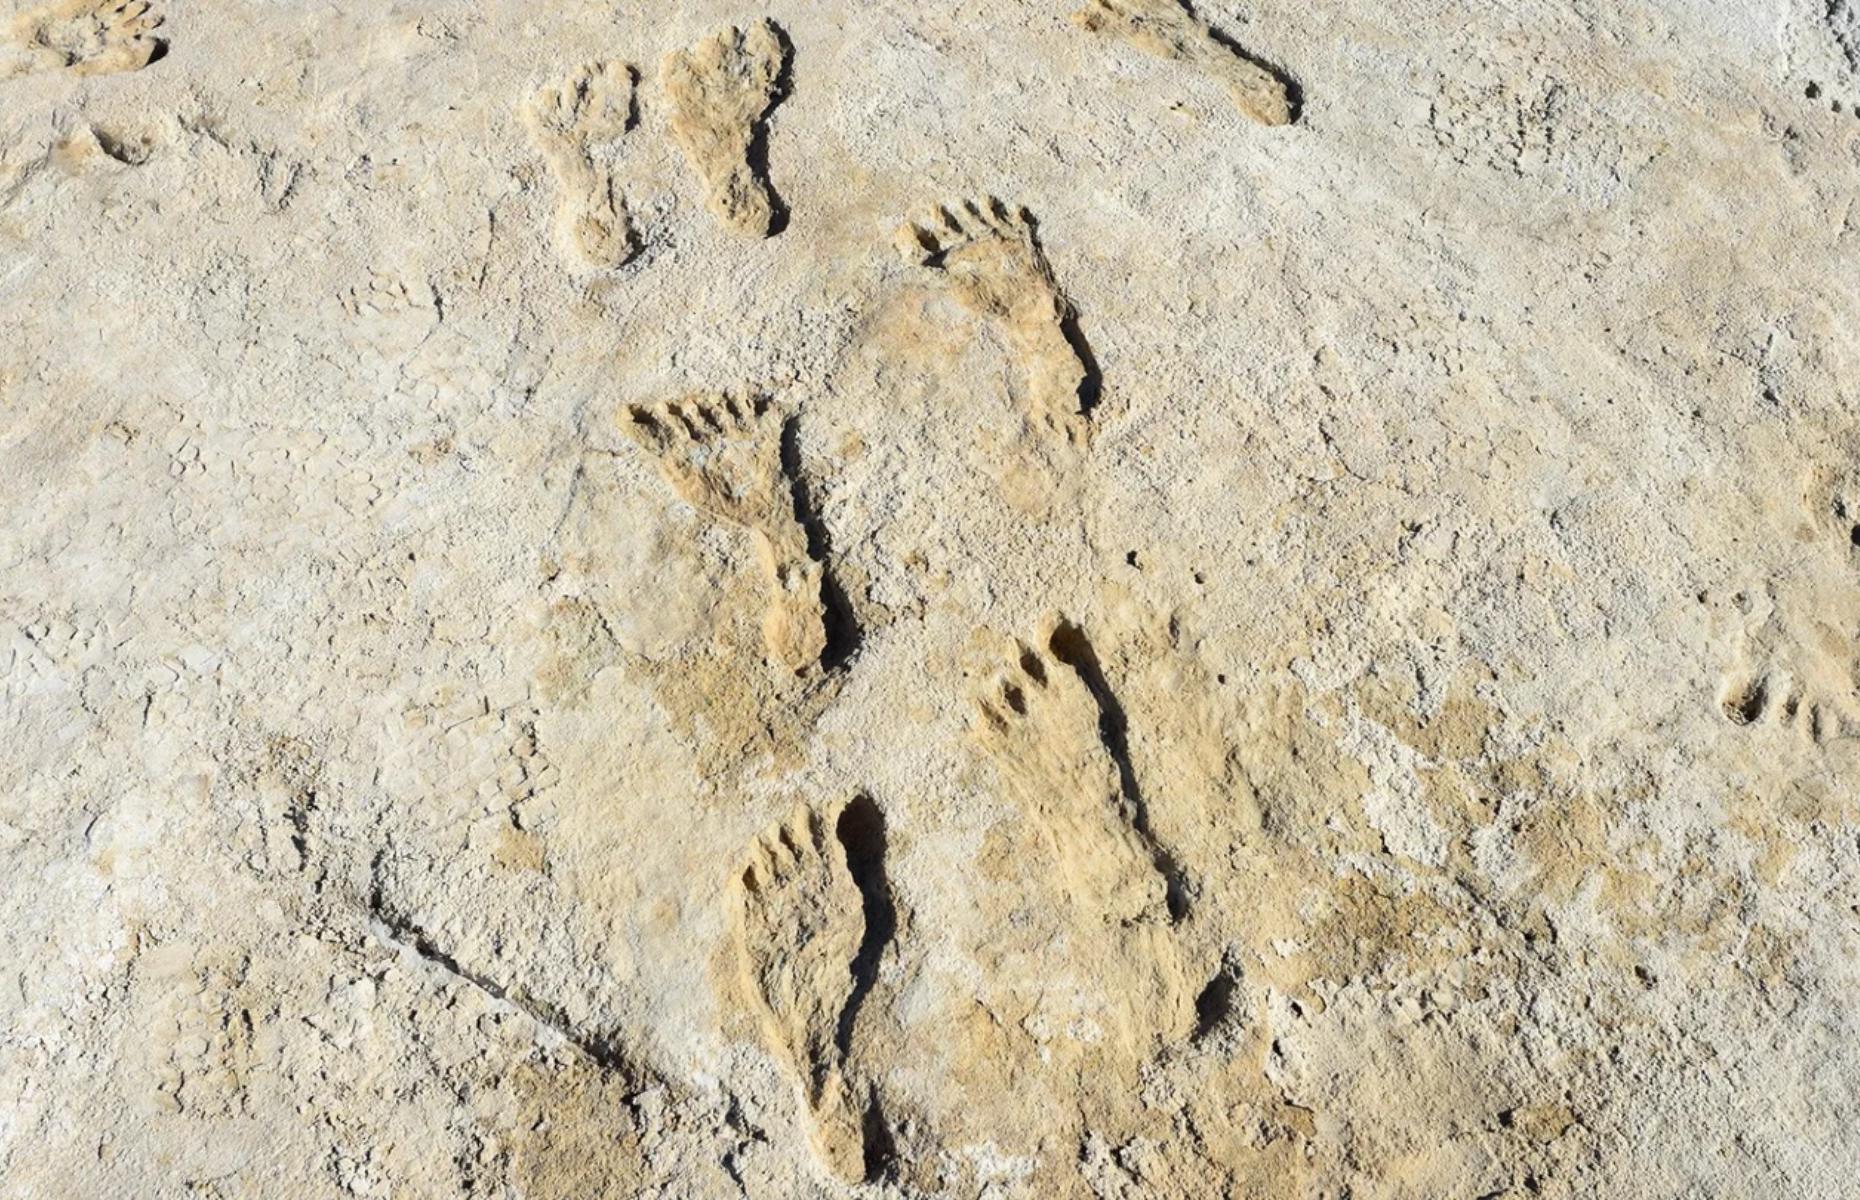 <p>Experts have been aware of ancient footprints at White Sands since the turn of the 20th century, but in 2021 scientists announced that seeds found within the footprints push back their date of origin to 21,000 BC, which would make them the oldest human footprints ever found. Not everyone agrees – some think the dating methods are flawed – but nobody doubts that the prints were left by extremely ancient prehistoric people, mostly children and teenagers.</p>  <p>Their feet left evidence that would cause archaeologists to argue thousands of years later.</p>